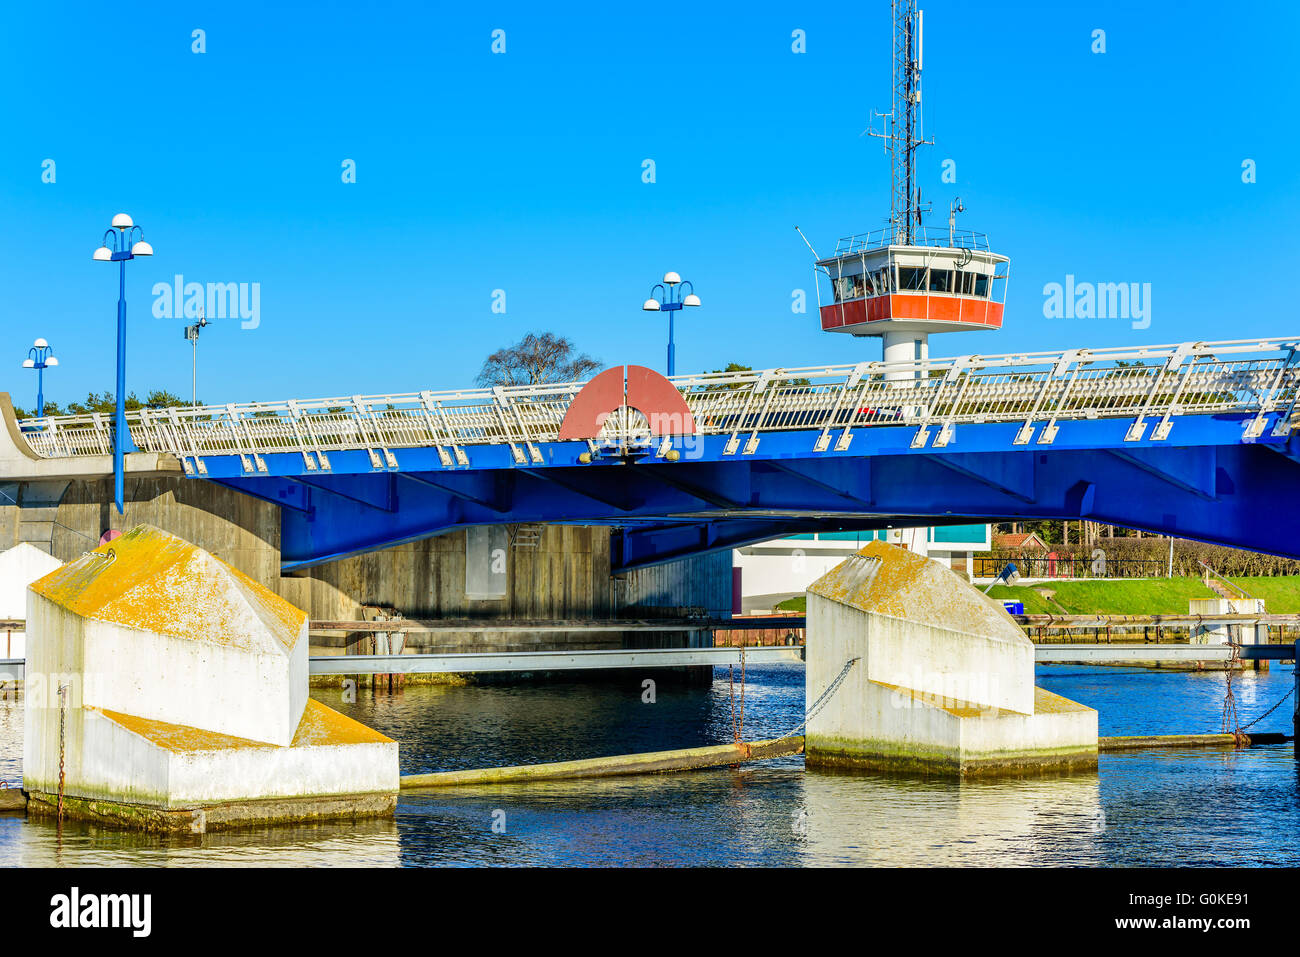 Falsterbo, Sweden - April 11, 2016: The bridge over Falsterbo canal as seen from the western shore. The bridge is retractable to Stock Photo